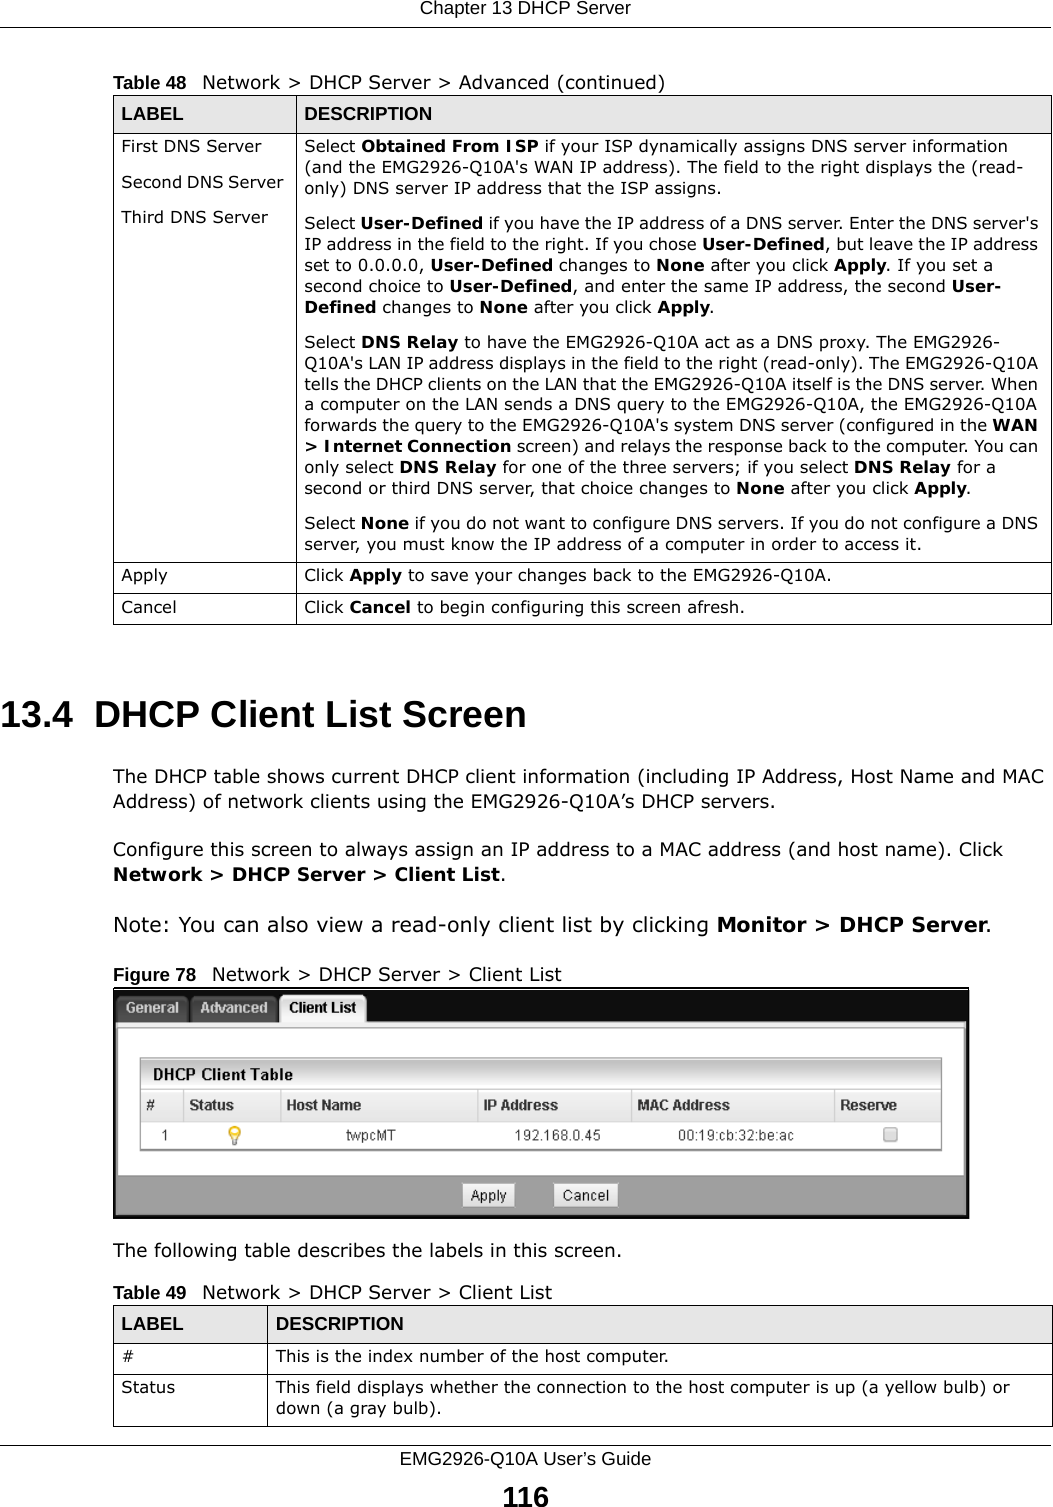 Chapter 13 DHCP ServerEMG2926-Q10A User’s Guide11613.4  DHCP Client List ScreenThe DHCP table shows current DHCP client information (including IP Address, Host Name and MAC Address) of network clients using the EMG2926-Q10A’s DHCP servers.Configure this screen to always assign an IP address to a MAC address (and host name). Click Network &gt; DHCP Server &gt; Client List. Note: You can also view a read-only client list by clicking Monitor &gt; DHCP Server. Figure 78   Network &gt; DHCP Server &gt; Client ListThe following table describes the labels in this screen.First DNS ServerSecond DNS Server Third DNS ServerSelect Obtained From ISP if your ISP dynamically assigns DNS server information (and the EMG2926-Q10A&apos;s WAN IP address). The field to the right displays the (read-only) DNS server IP address that the ISP assigns. Select User-Defined if you have the IP address of a DNS server. Enter the DNS server&apos;s IP address in the field to the right. If you chose User-Defined, but leave the IP address set to 0.0.0.0, User-Defined changes to None after you click Apply. If you set a second choice to User-Defined, and enter the same IP address, the second User-Defined changes to None after you click Apply. Select DNS Relay to have the EMG2926-Q10A act as a DNS proxy. The EMG2926-Q10A&apos;s LAN IP address displays in the field to the right (read-only). The EMG2926-Q10A tells the DHCP clients on the LAN that the EMG2926-Q10A itself is the DNS server. When a computer on the LAN sends a DNS query to the EMG2926-Q10A, the EMG2926-Q10A forwards the query to the EMG2926-Q10A&apos;s system DNS server (configured in the WAN &gt; Internet Connection screen) and relays the response back to the computer. You can only select DNS Relay for one of the three servers; if you select DNS Relay for a second or third DNS server, that choice changes to None after you click Apply. Select None if you do not want to configure DNS servers. If you do not configure a DNS server, you must know the IP address of a computer in order to access it.Apply Click Apply to save your changes back to the EMG2926-Q10A.Cancel Click Cancel to begin configuring this screen afresh.Table 48   Network &gt; DHCP Server &gt; Advanced (continued)LABEL DESCRIPTIONTable 49   Network &gt; DHCP Server &gt; Client ListLABEL  DESCRIPTION#  This is the index number of the host computer.Status This field displays whether the connection to the host computer is up (a yellow bulb) or down (a gray bulb).